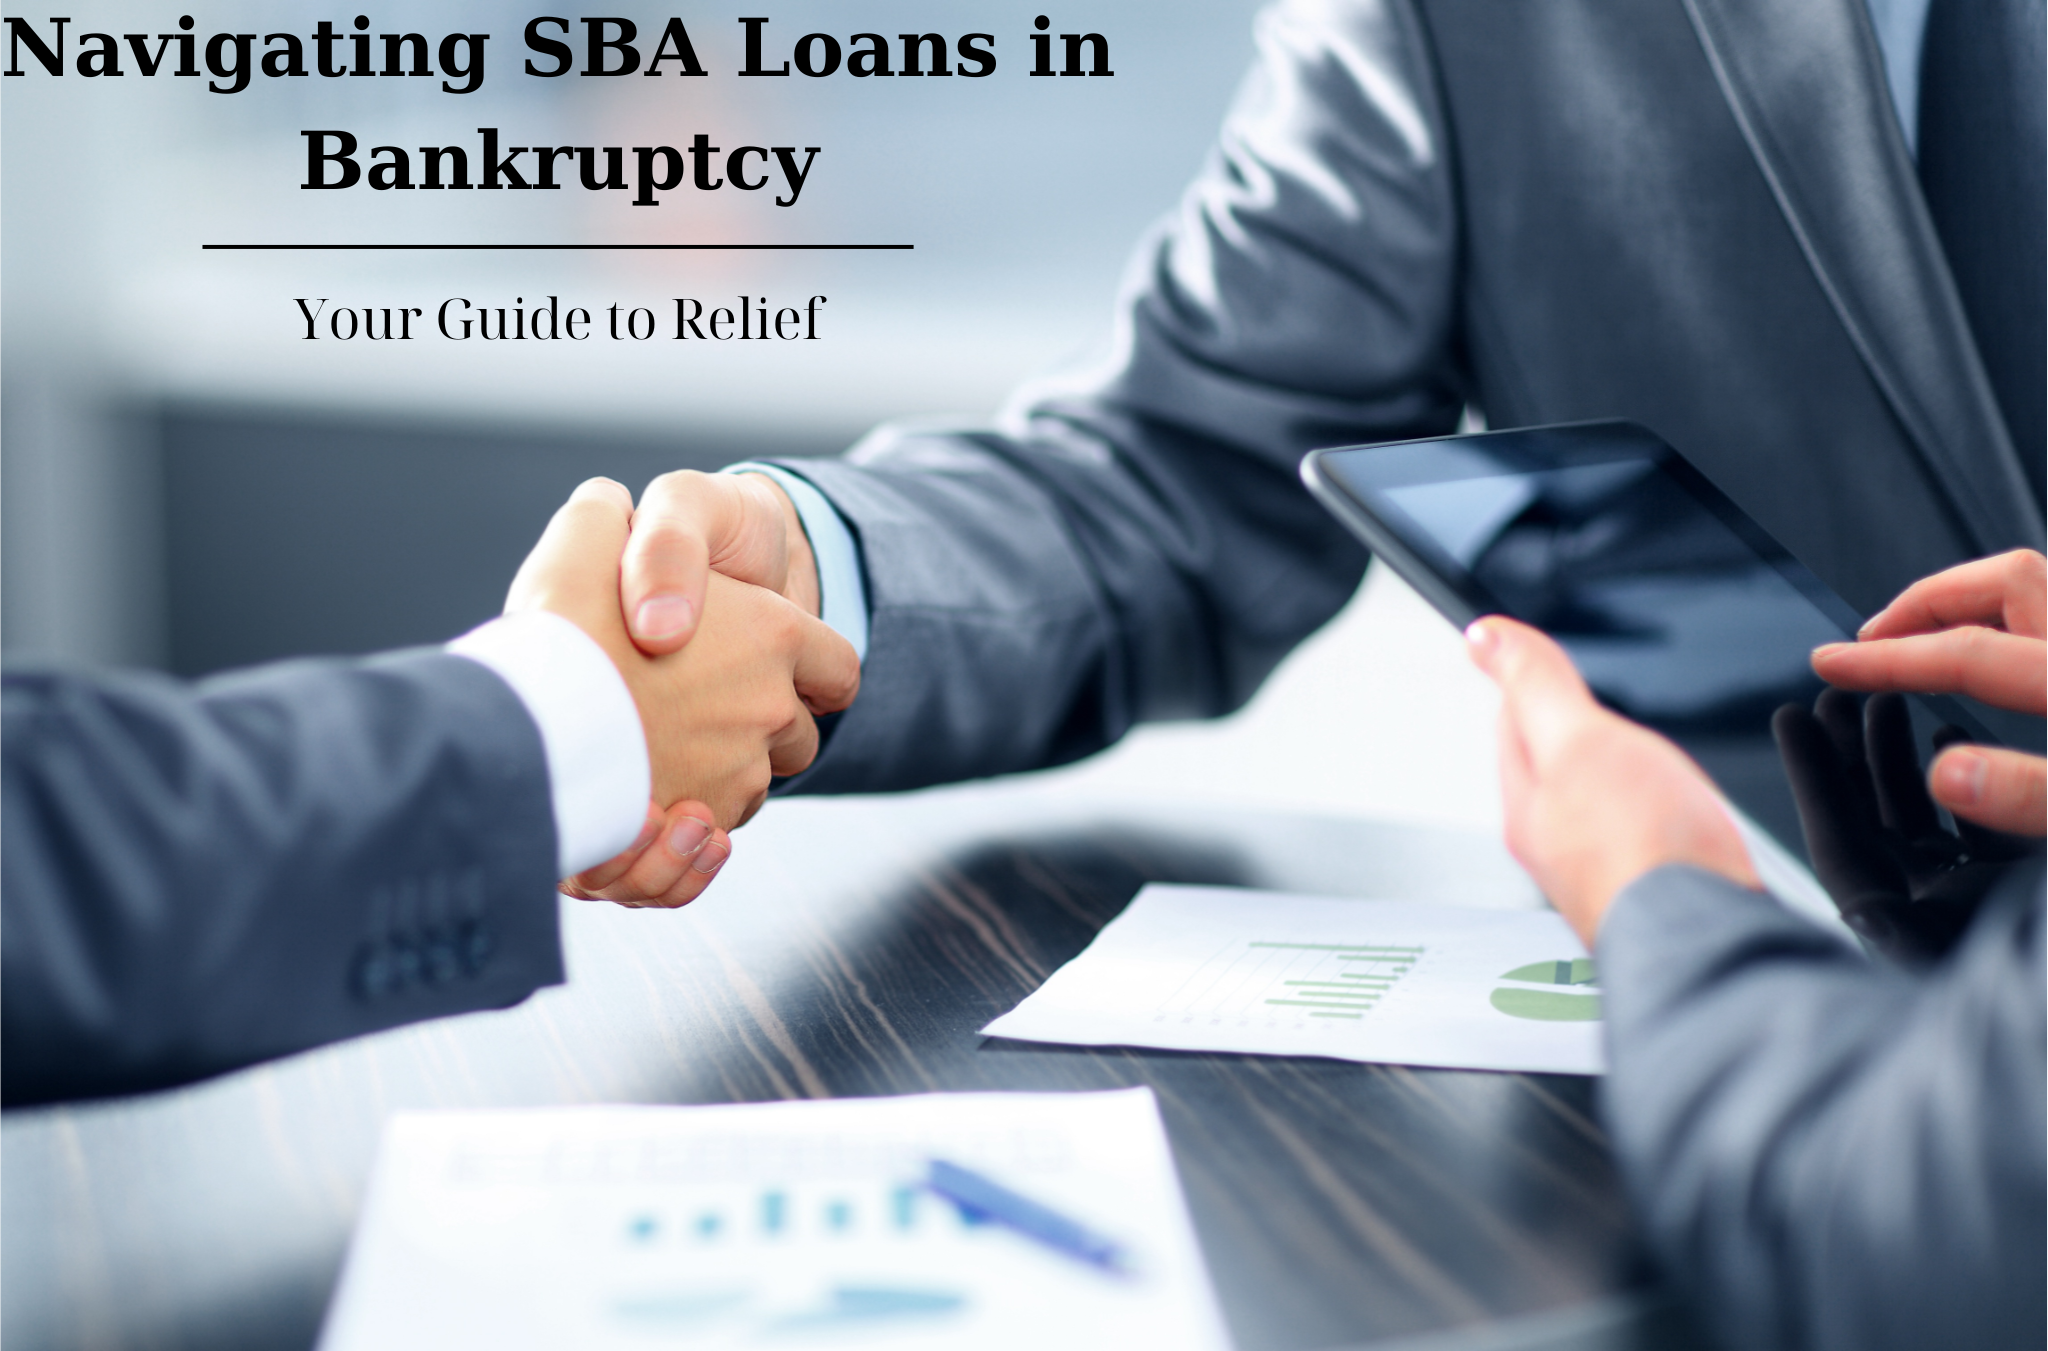 Can SBA loans be discharged in bankruptcy? Your guide to navigating relief.